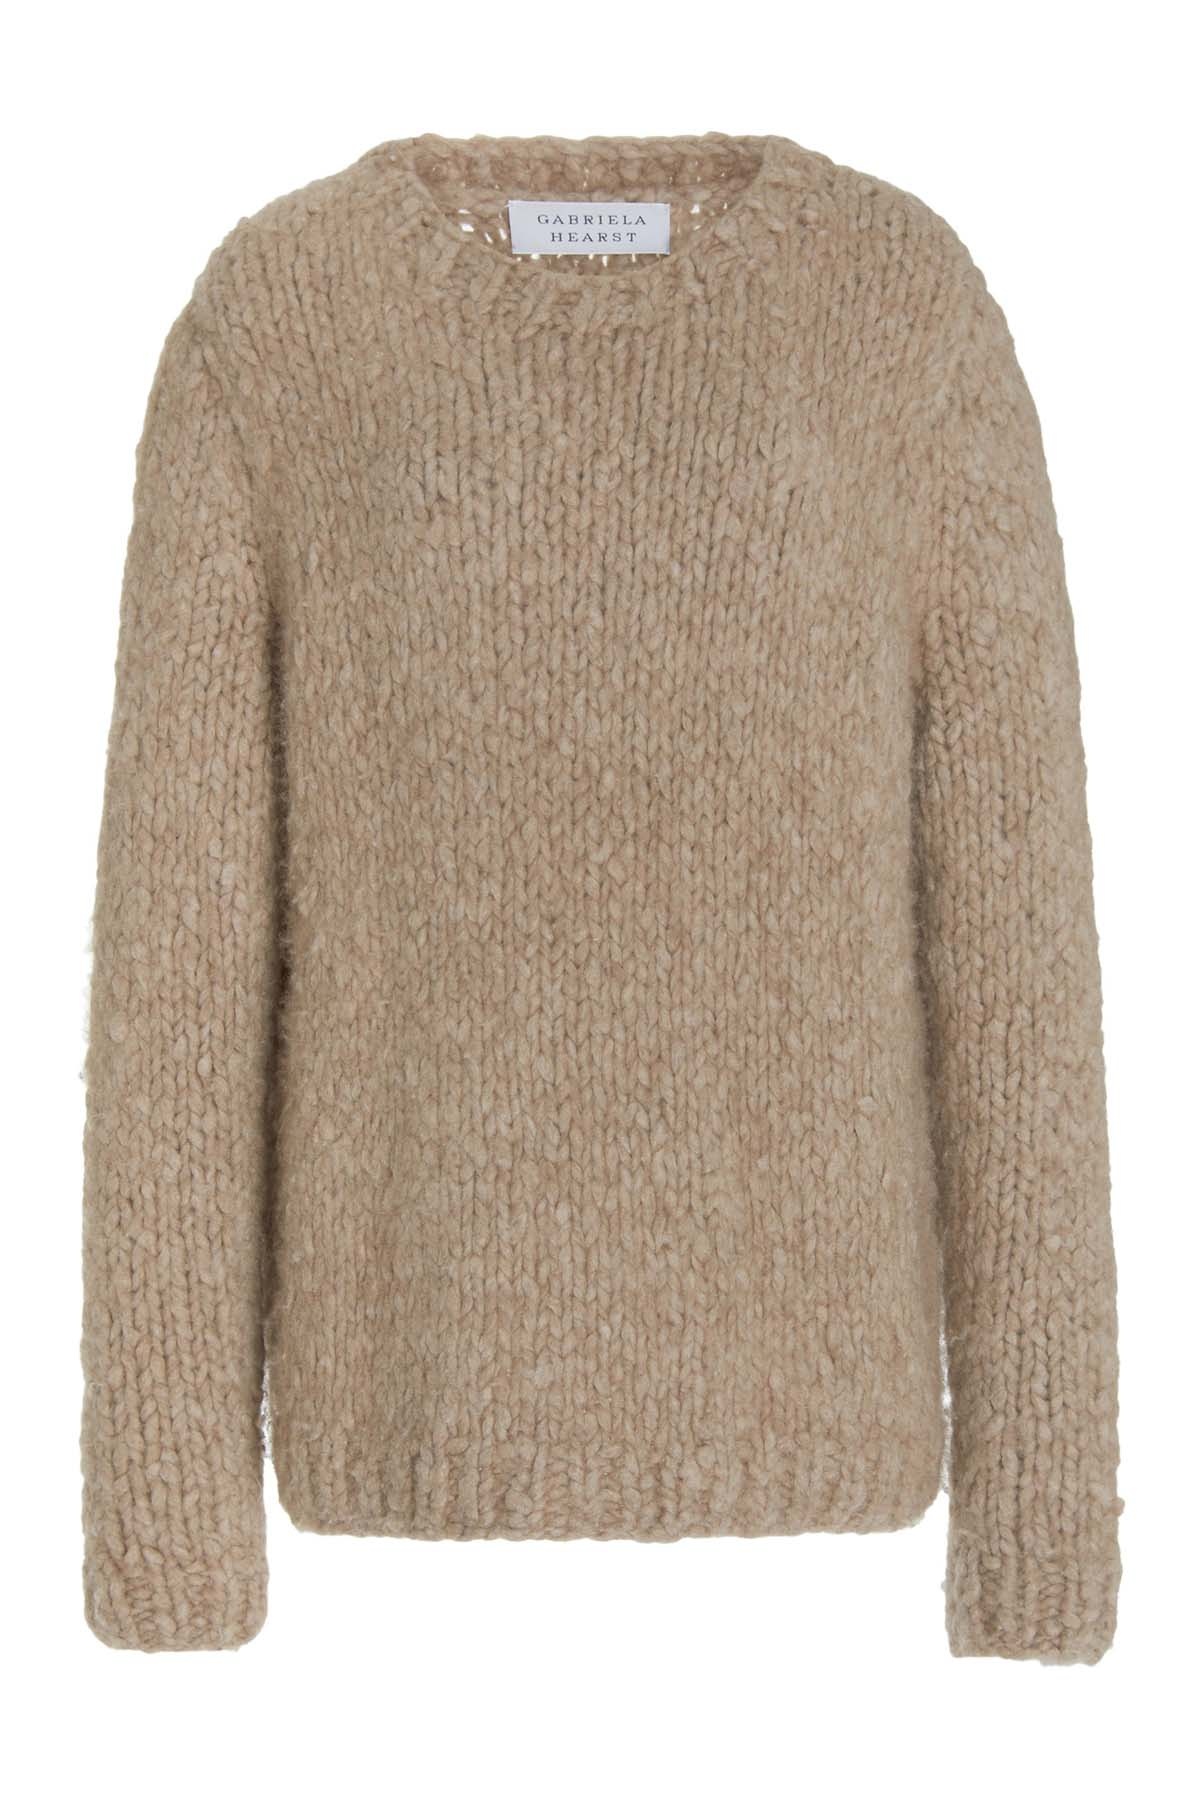 Lawrence Knit Sweater in Oatmeal Welfat Cashmere - 1